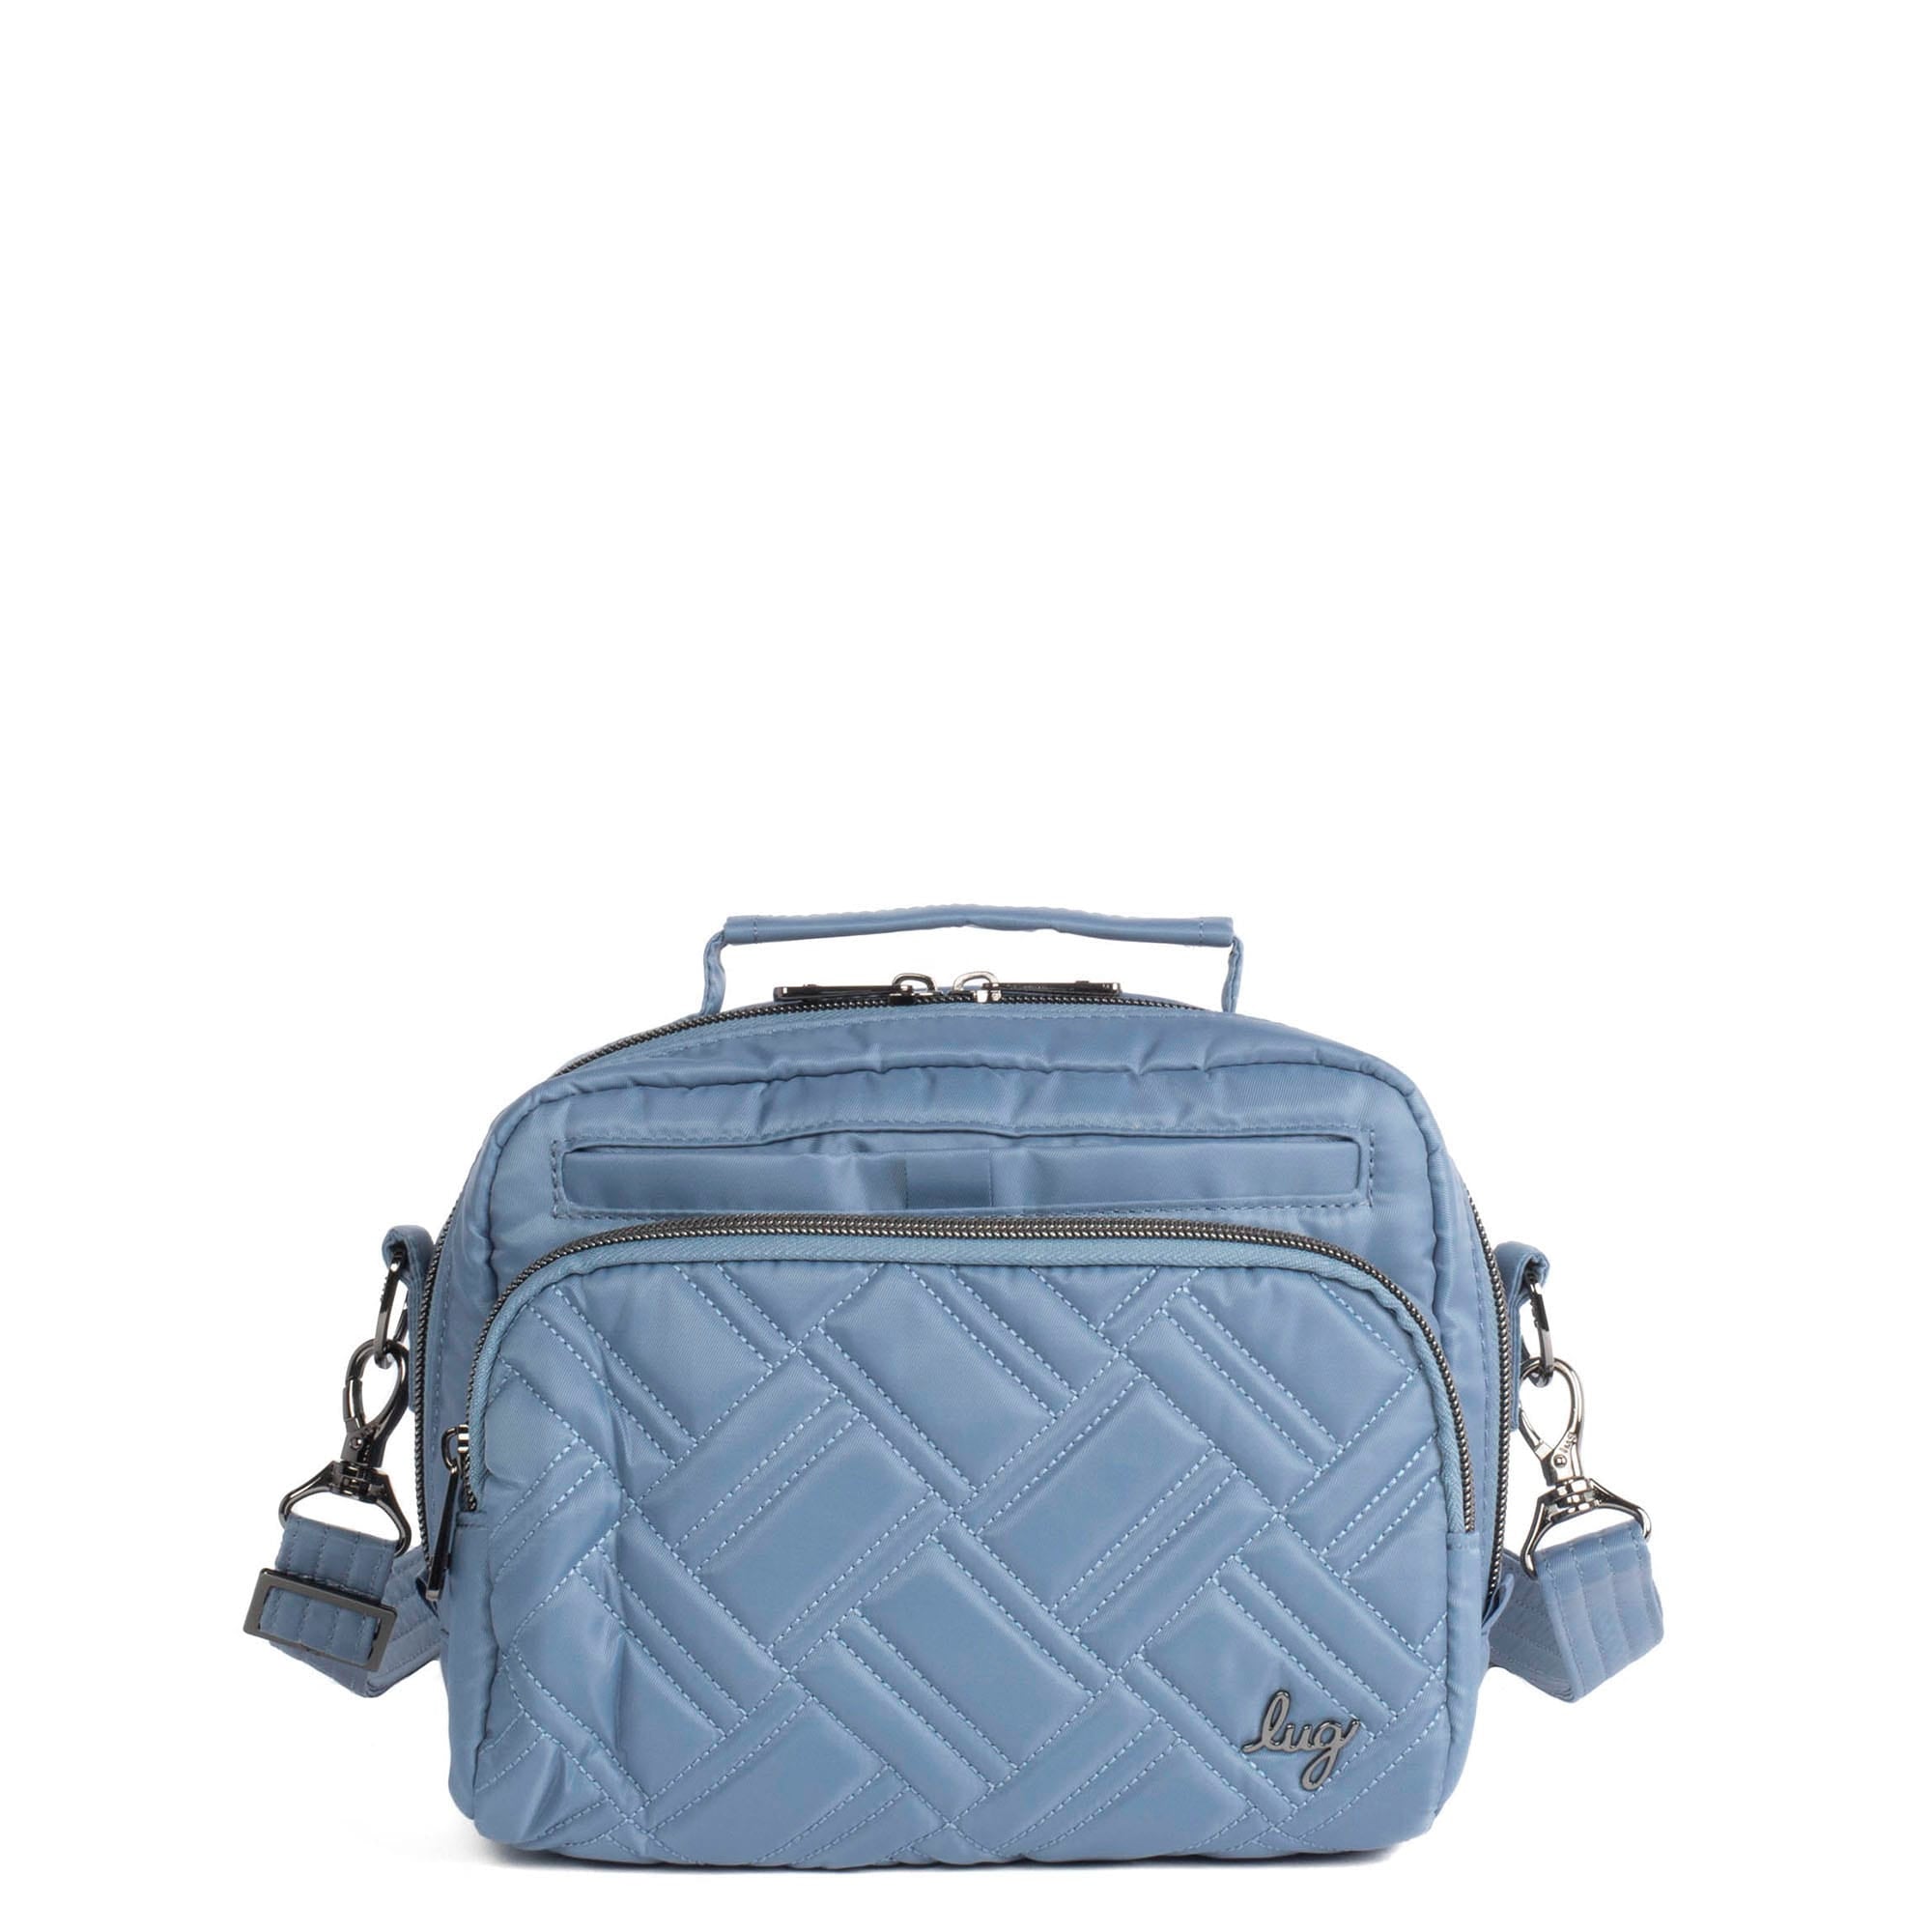 Under One Sky, Bags, Eight By Under One Sky Convertible Backpack Purse